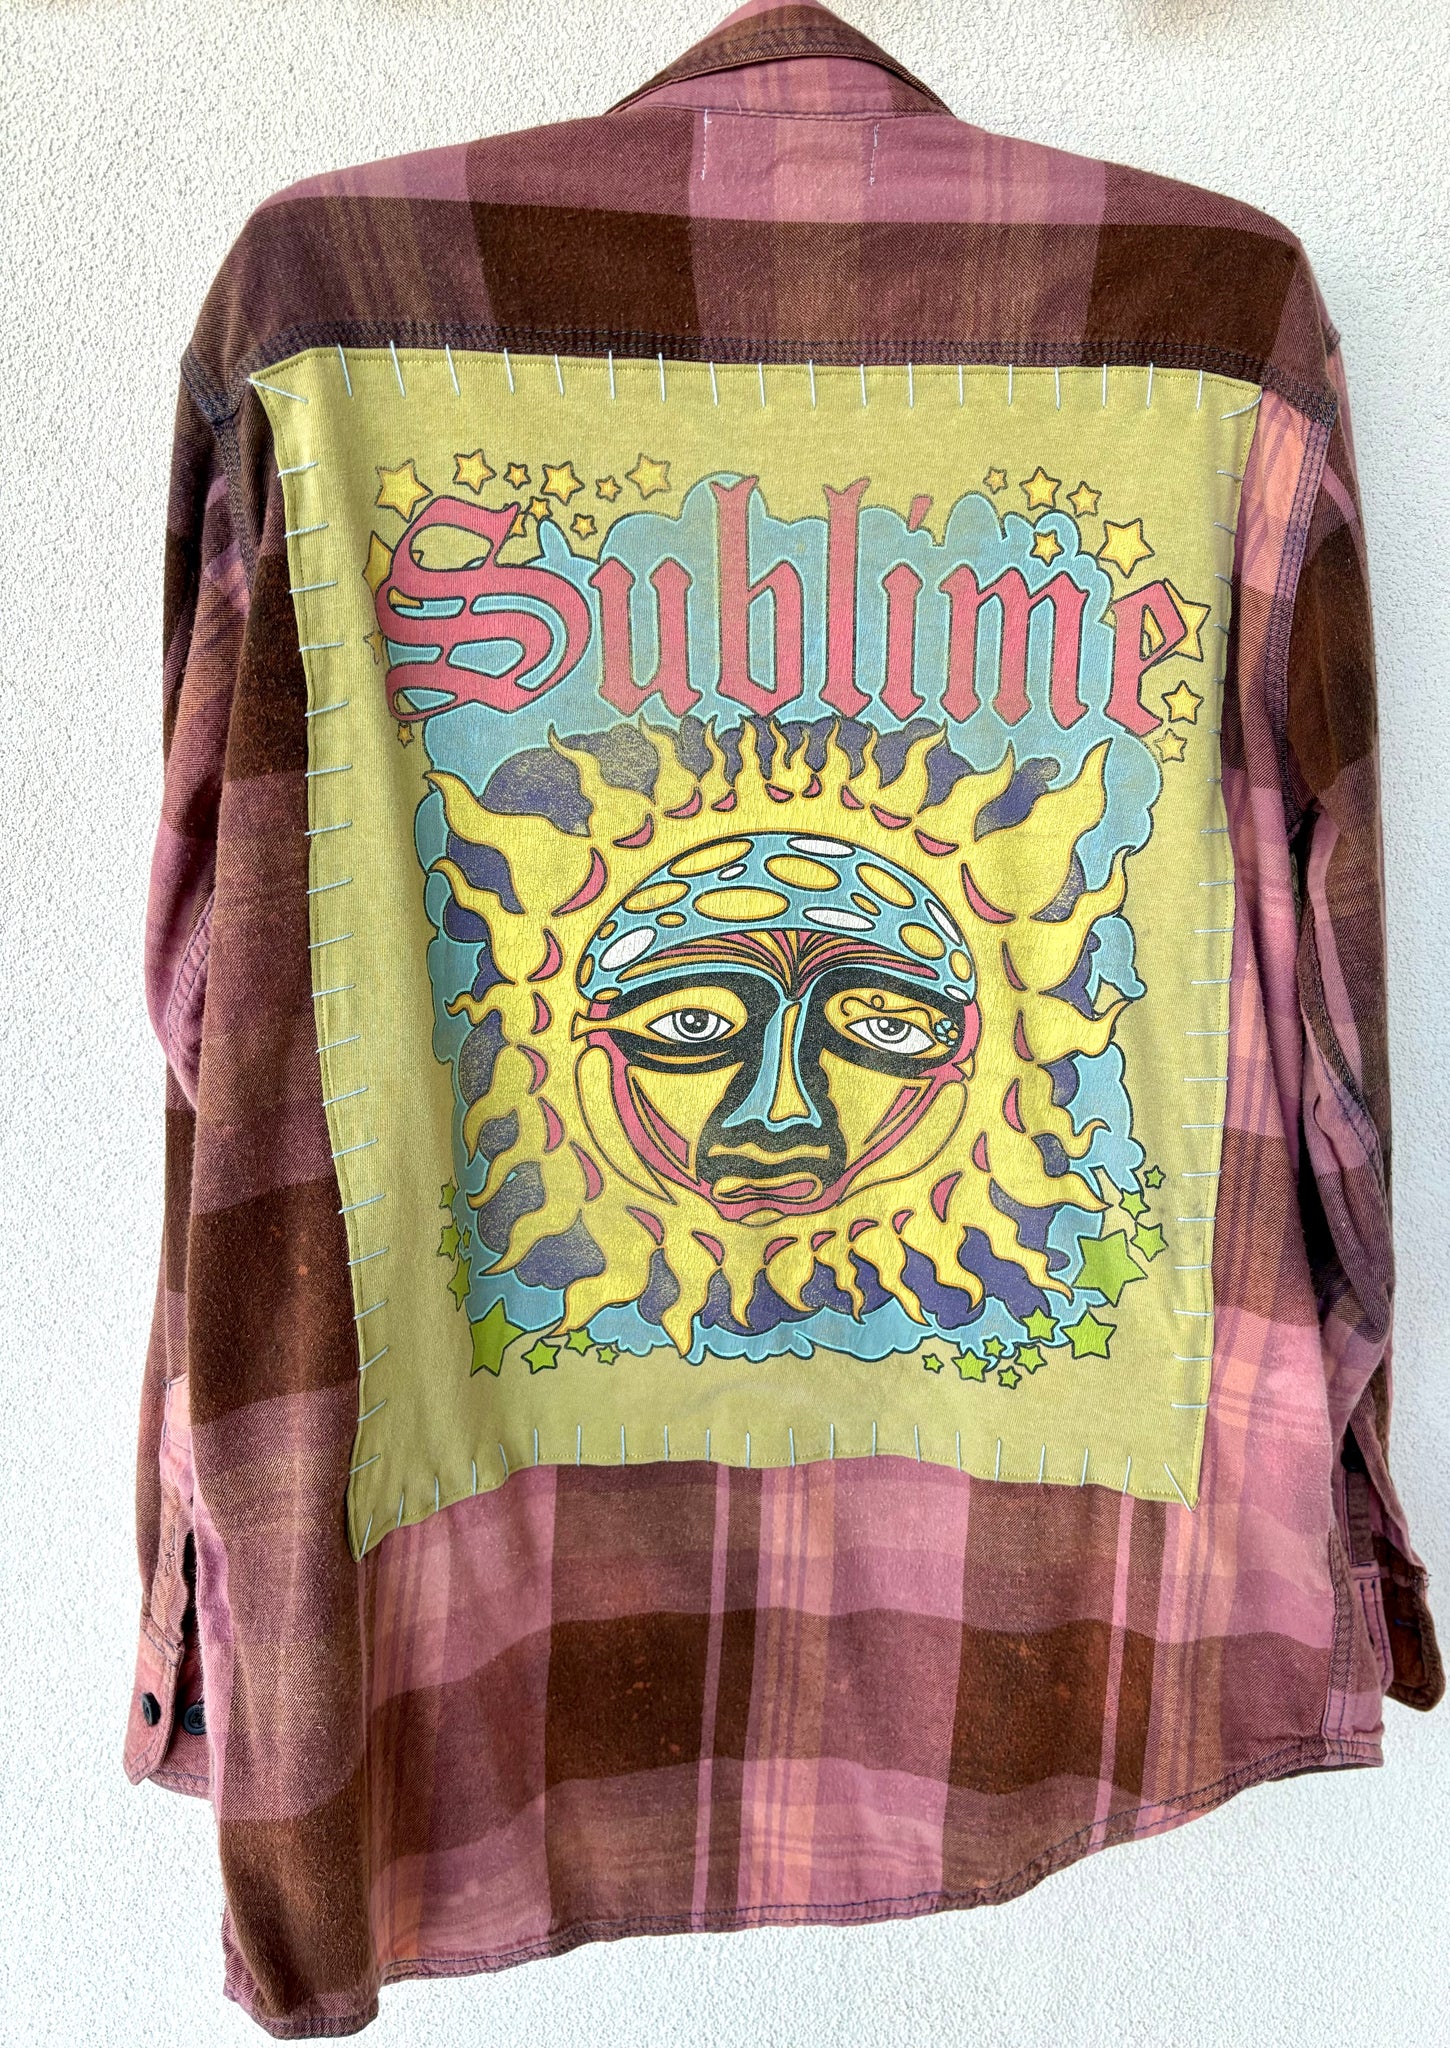 Sublime Upcycled Flannel Shirt